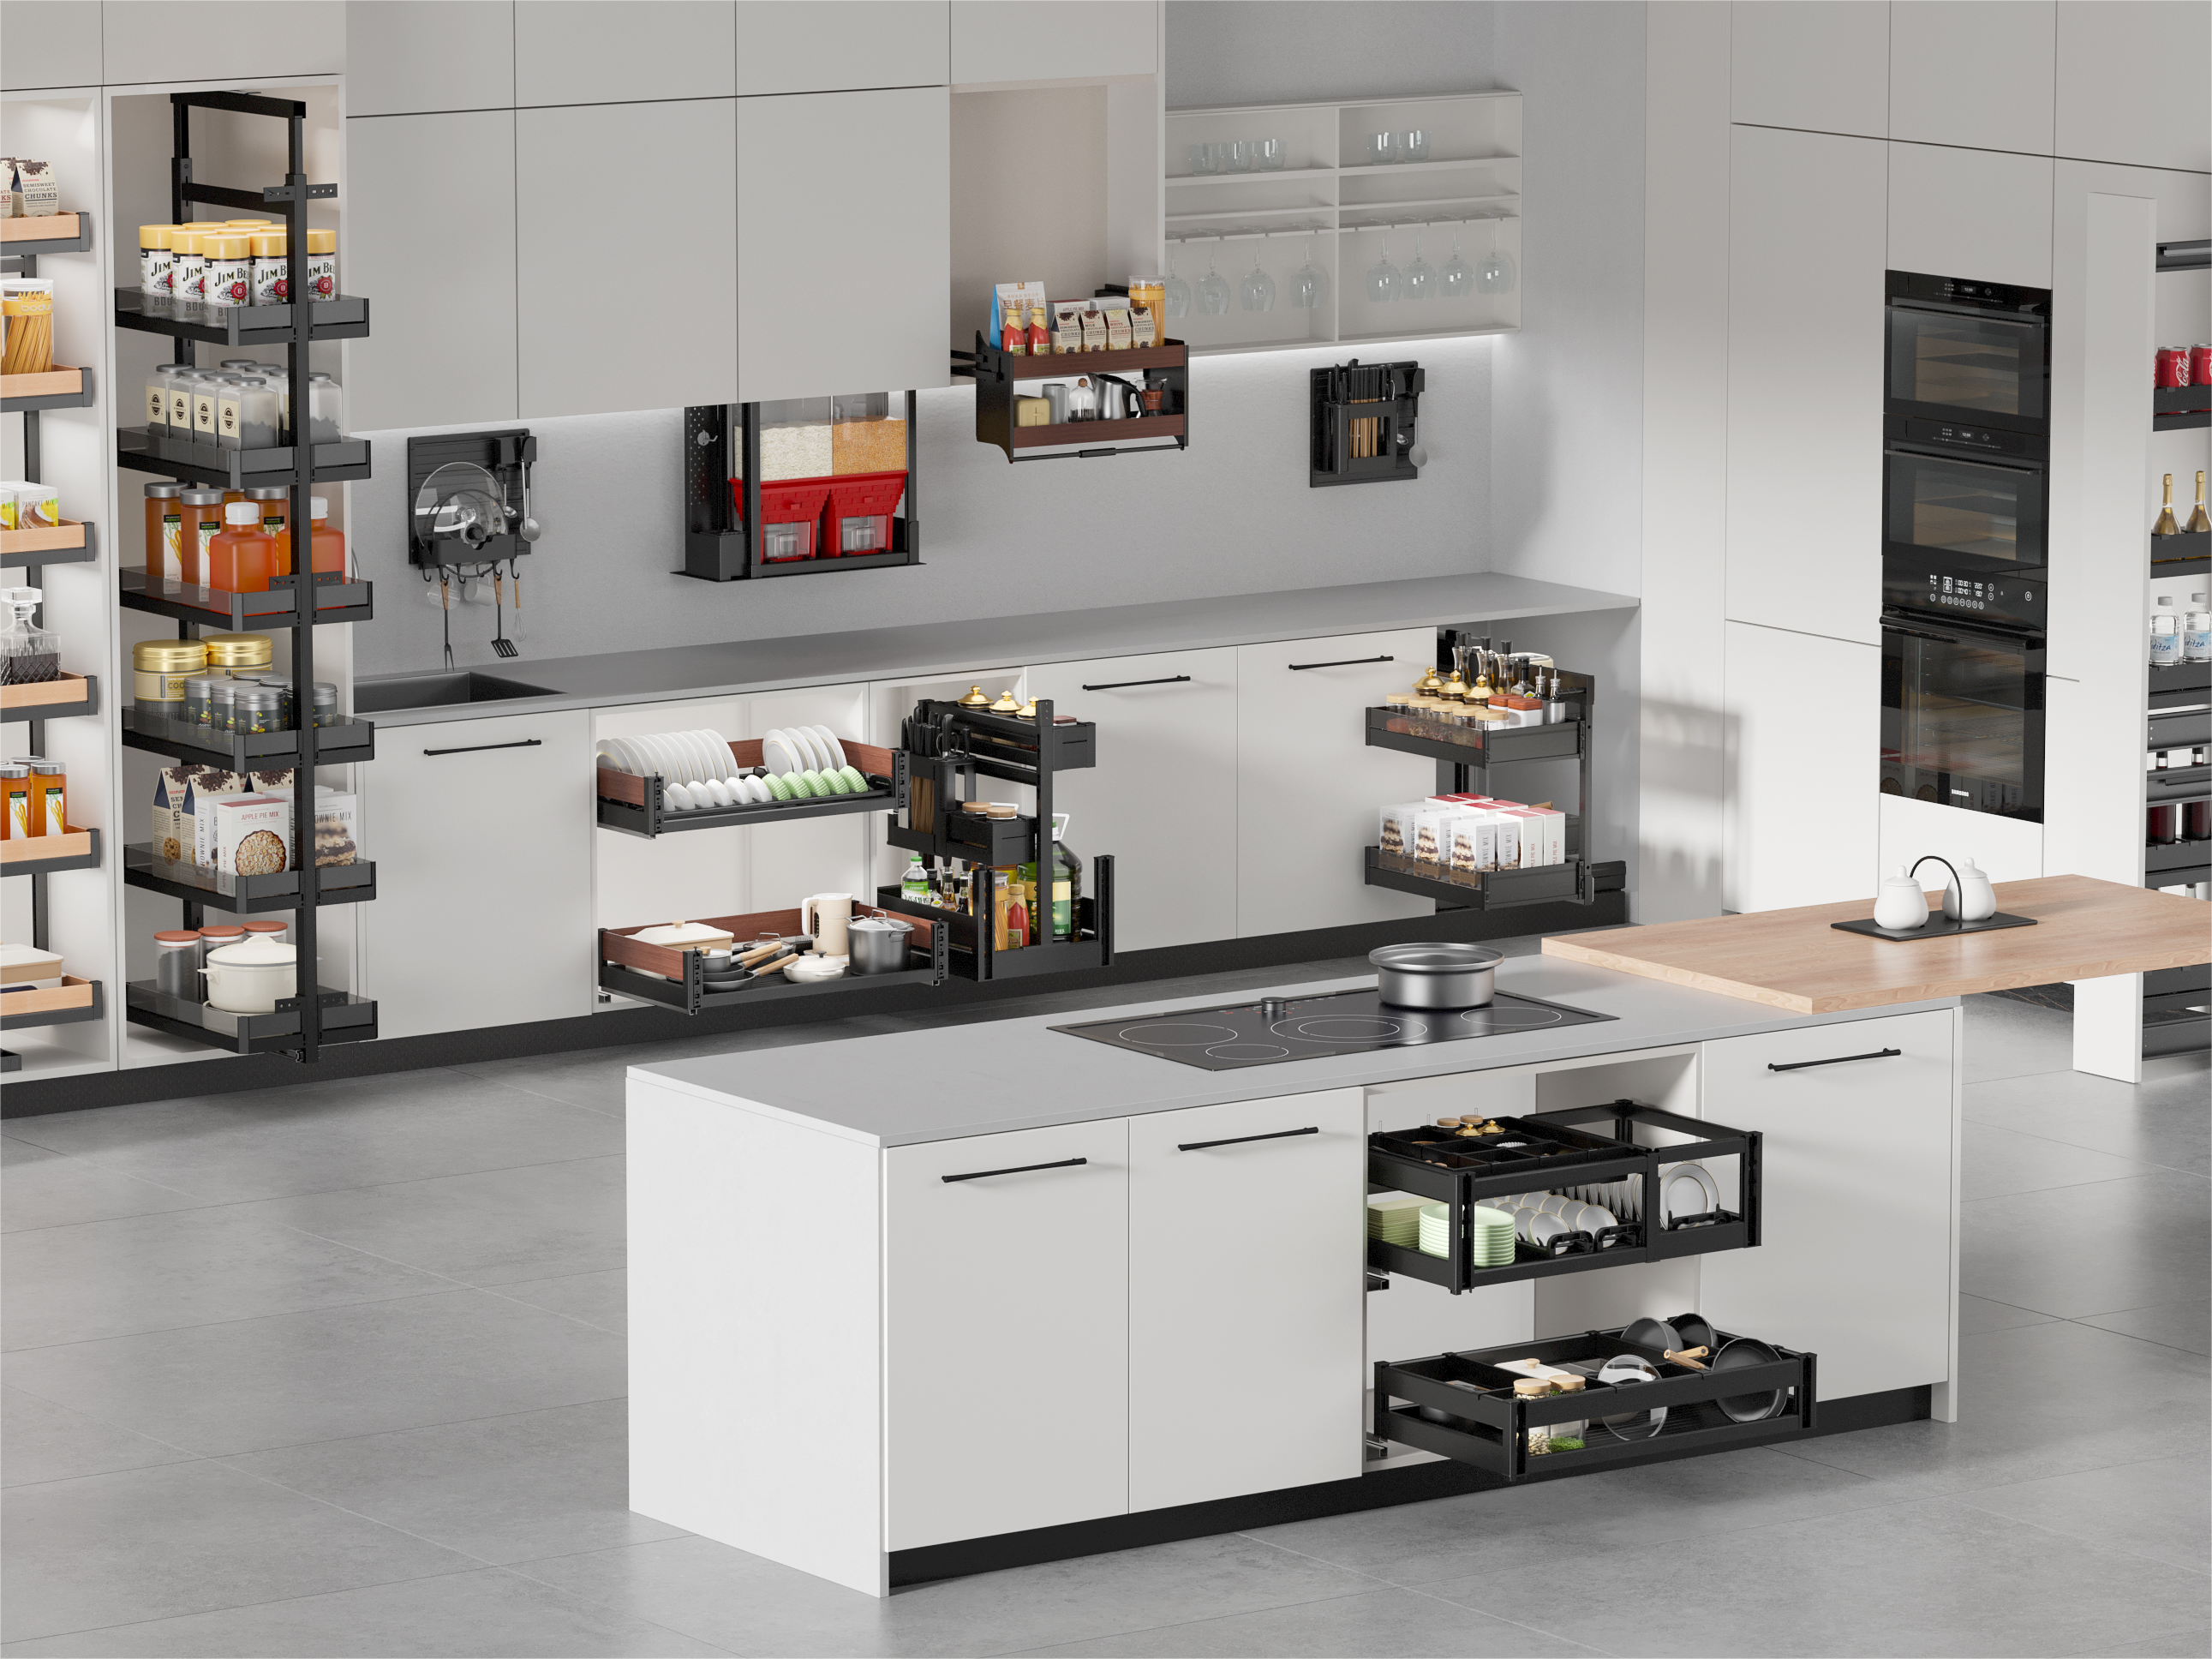 How to efficiently store in kitchen